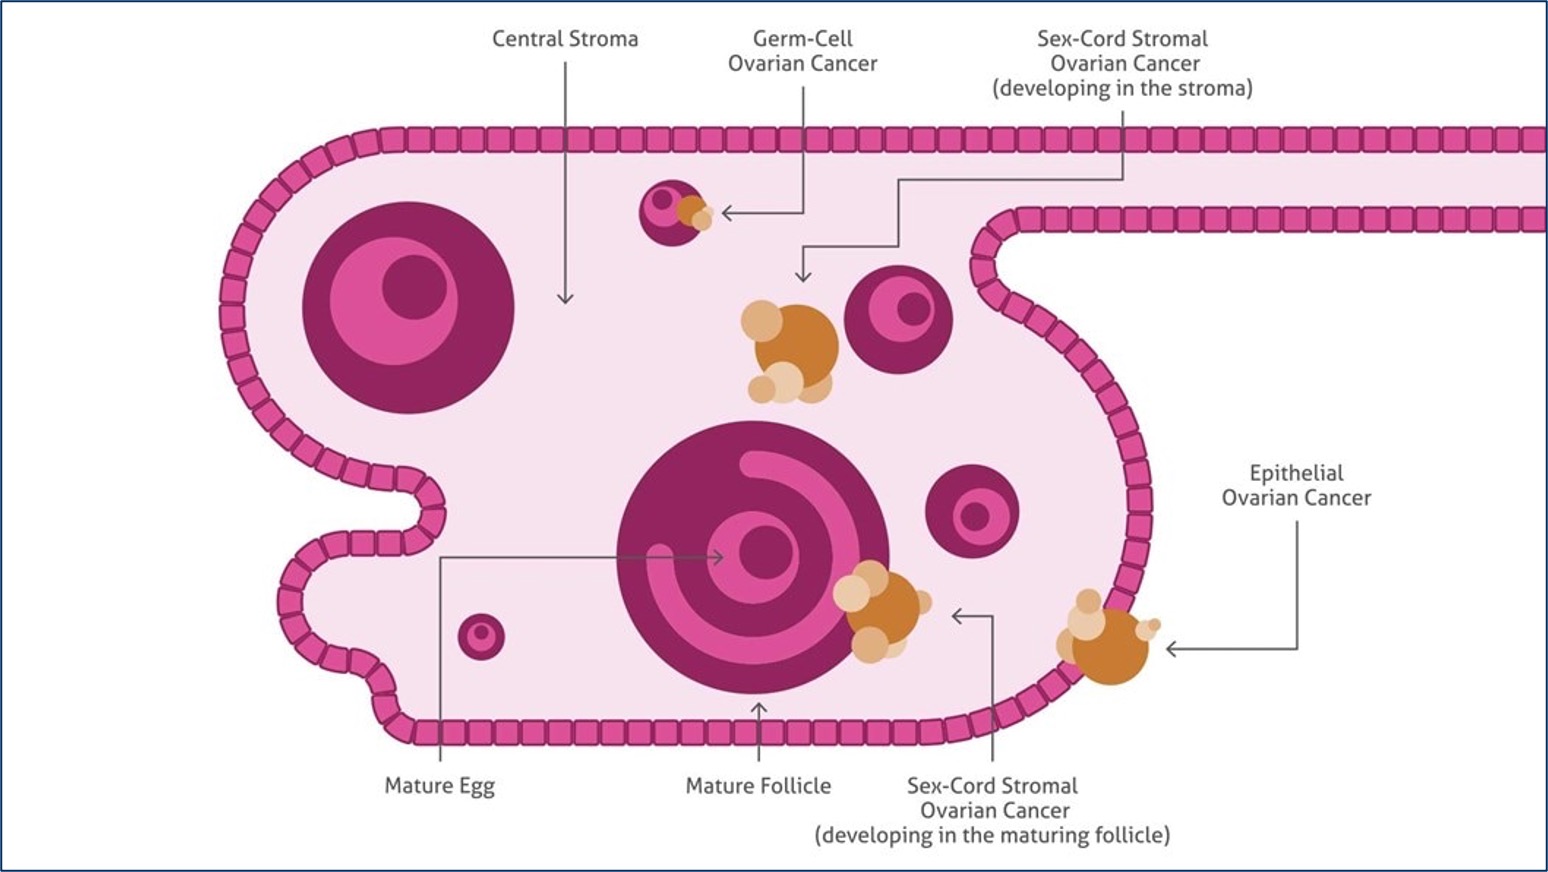 Schema of the ovary showing the histopathological types of ovarian cancer